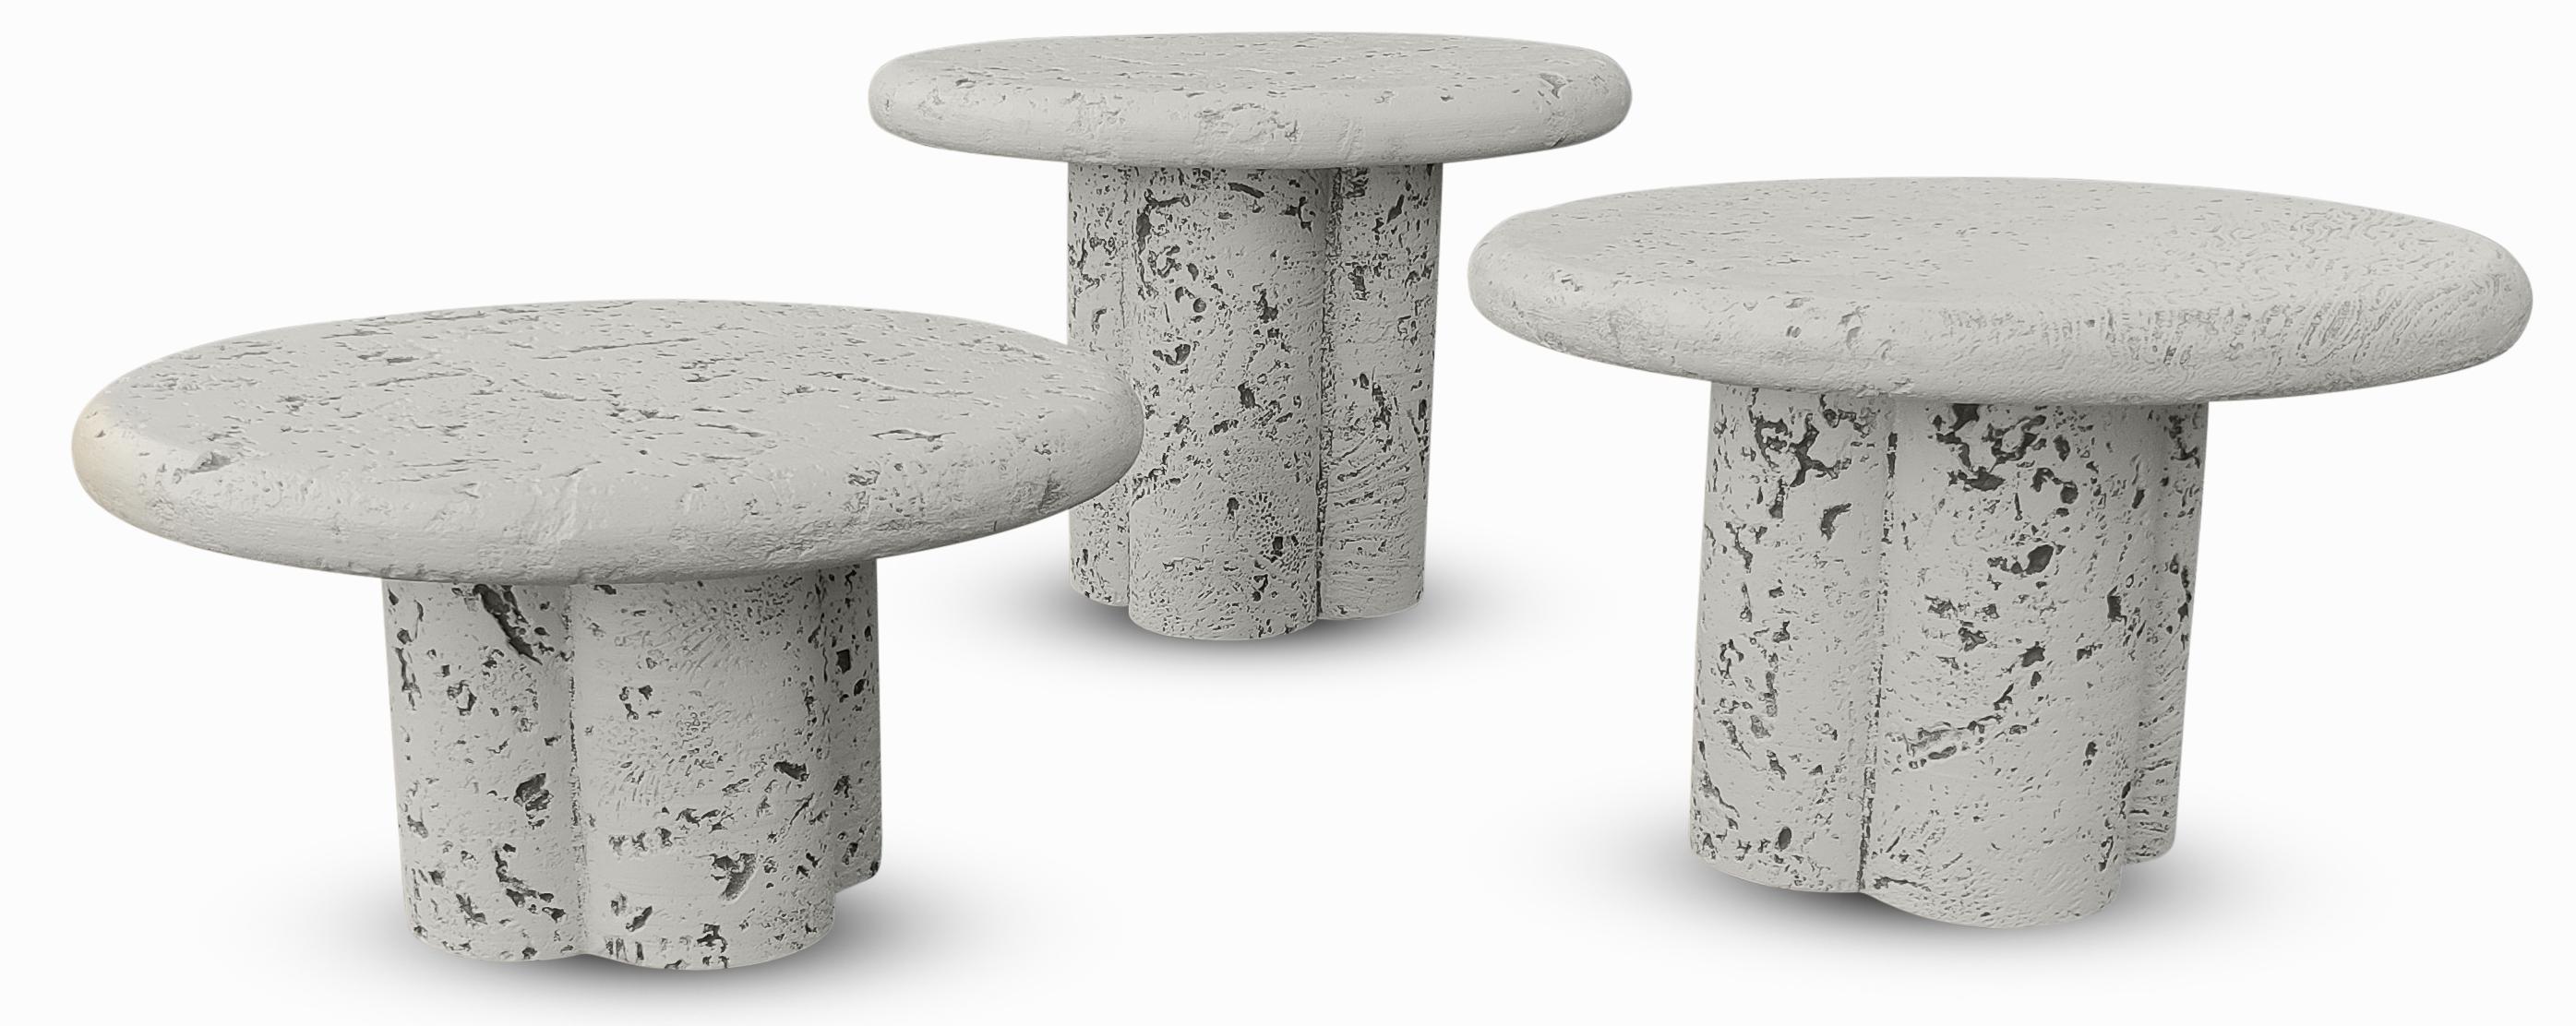 A very cool set of three Post-Modern, Faux Coral or Fossil Stone, composition made, round nesting tables. Made and retailed by Maurice Villency in the late 1970s or early 80s, this set of tables is fresh from the upscale original home in Larchmont